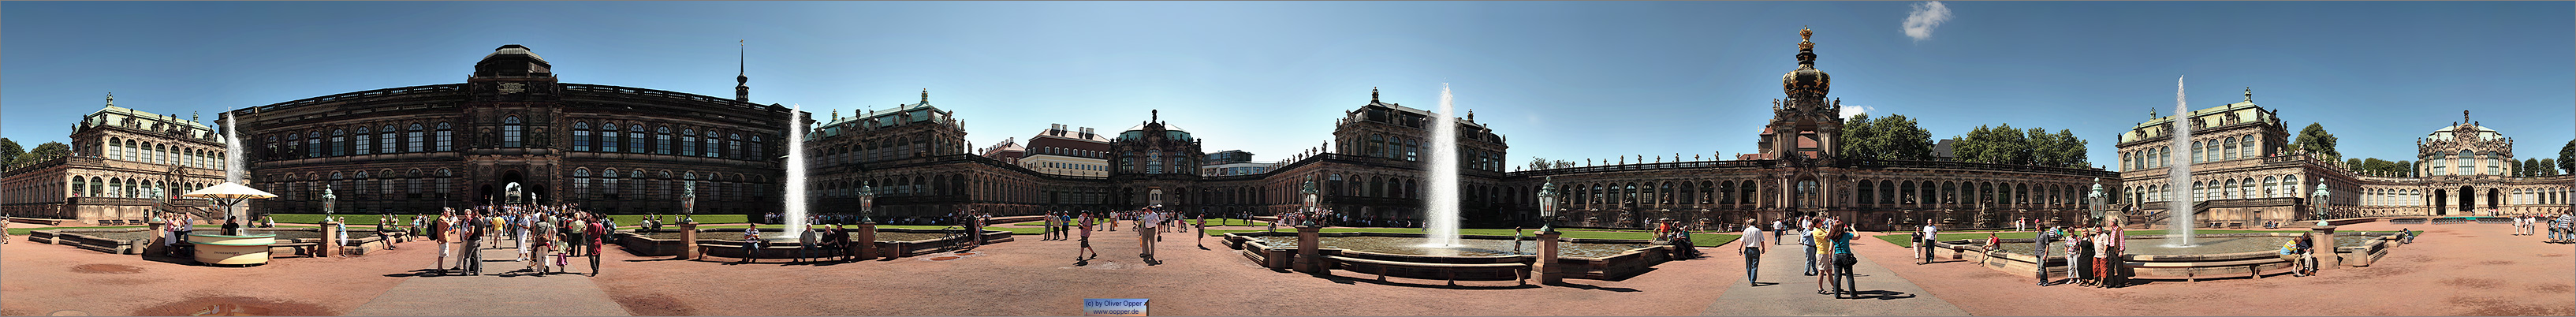 Panorama Dresden - Zwinger - p21 - (c) by Oliver Opper